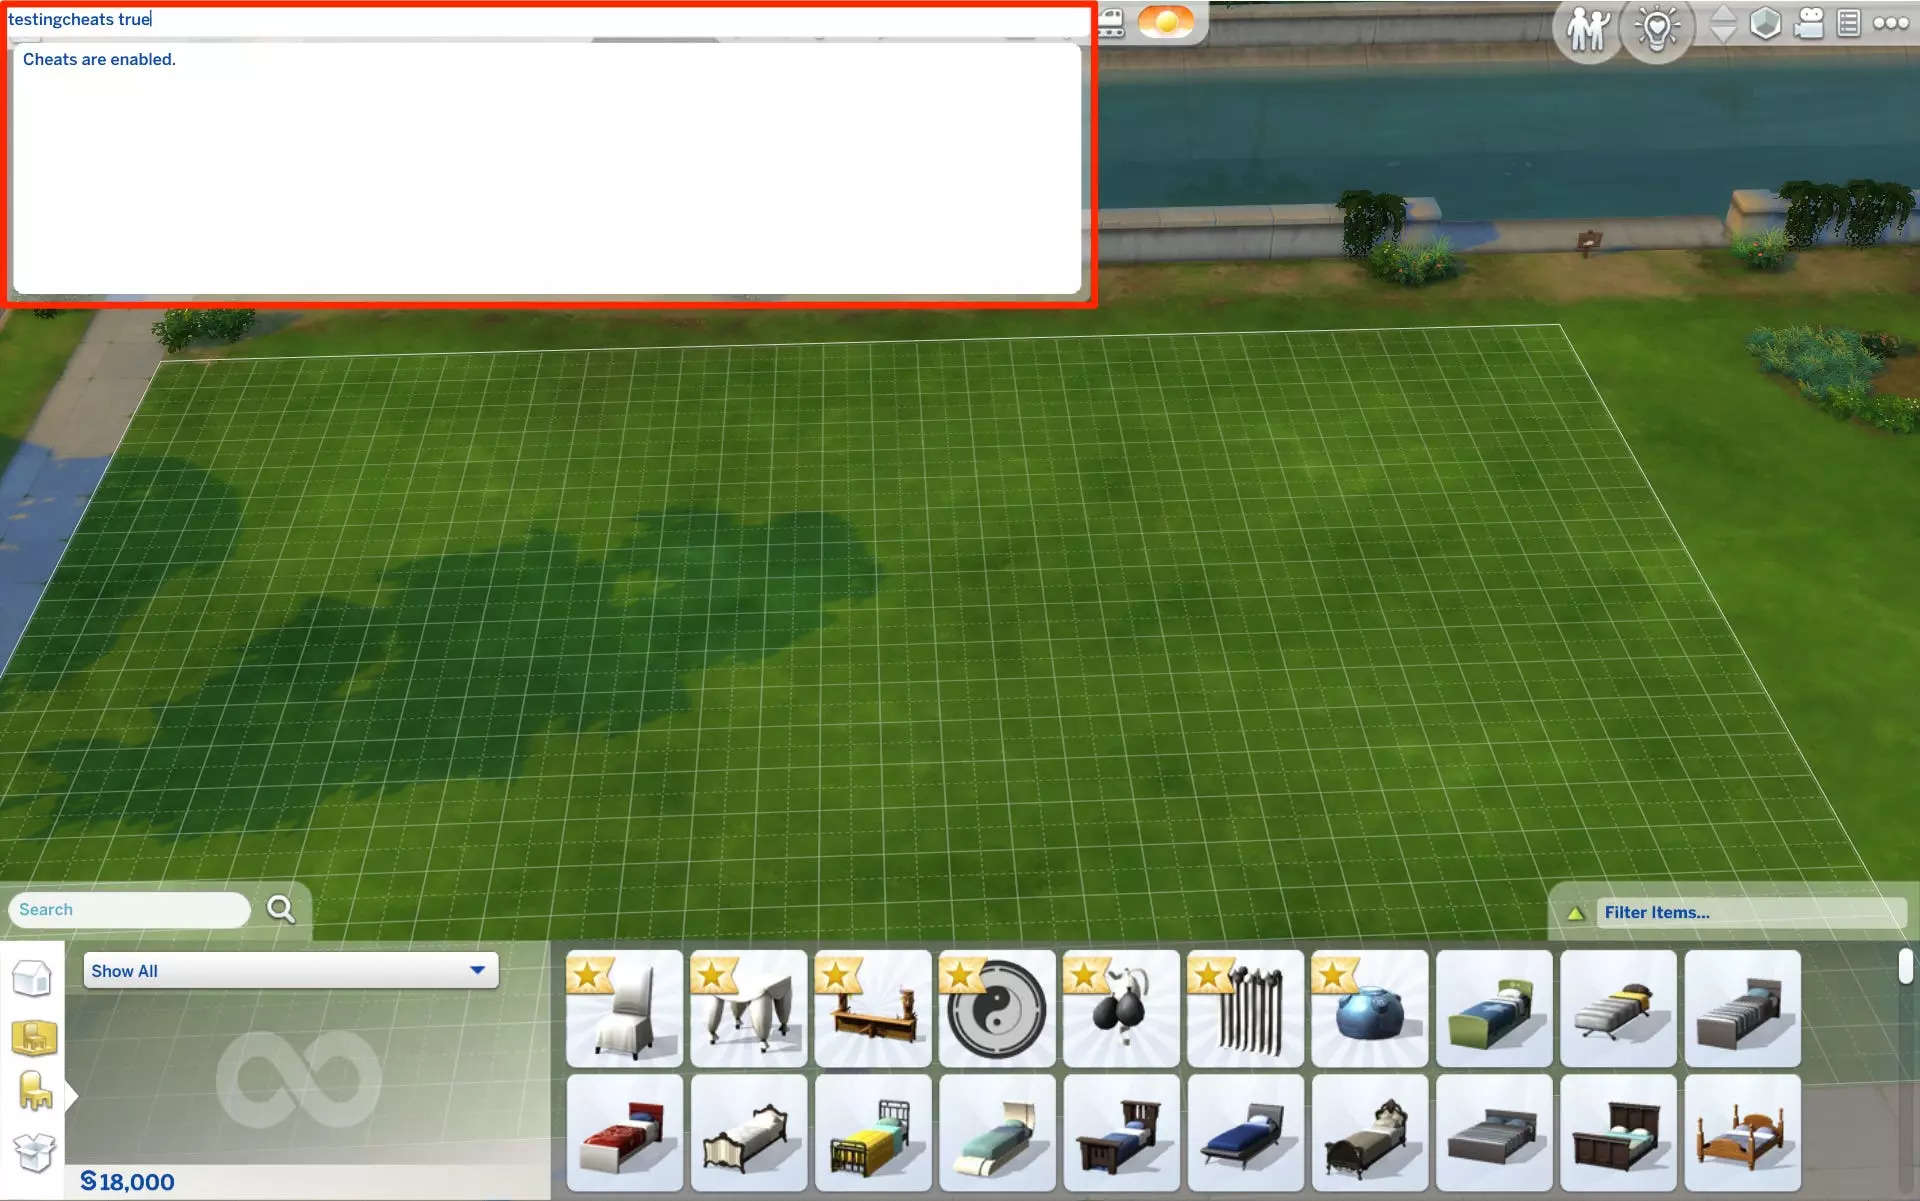 How to Activate Cheats in The Sims 4 and Which Ones Are the Most